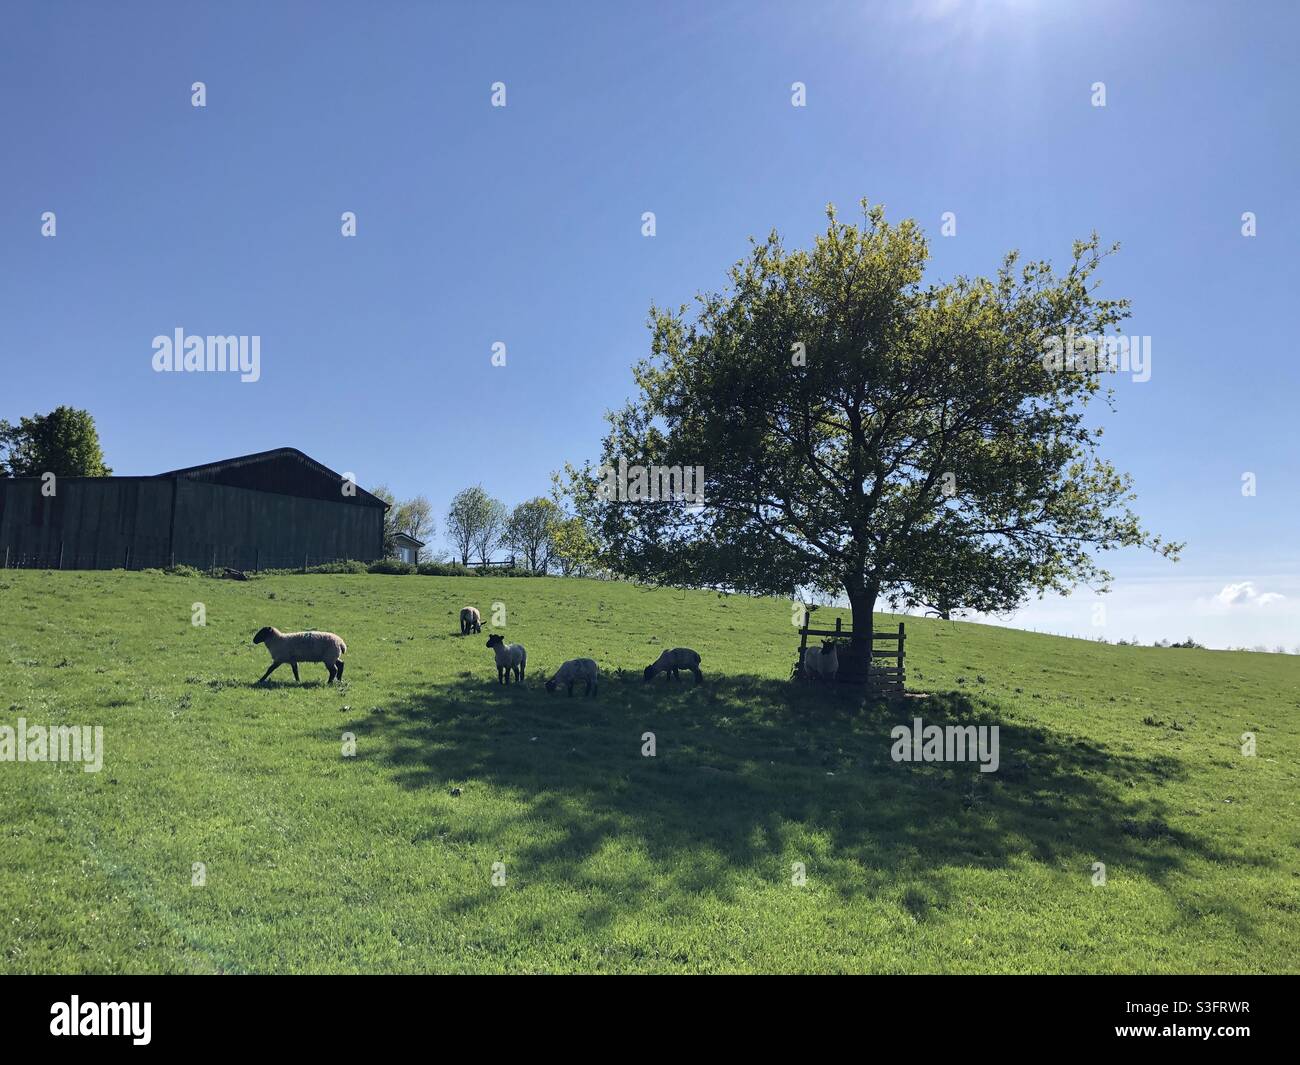 Lambs in a field in late spring, United Kingdom Stock Photo